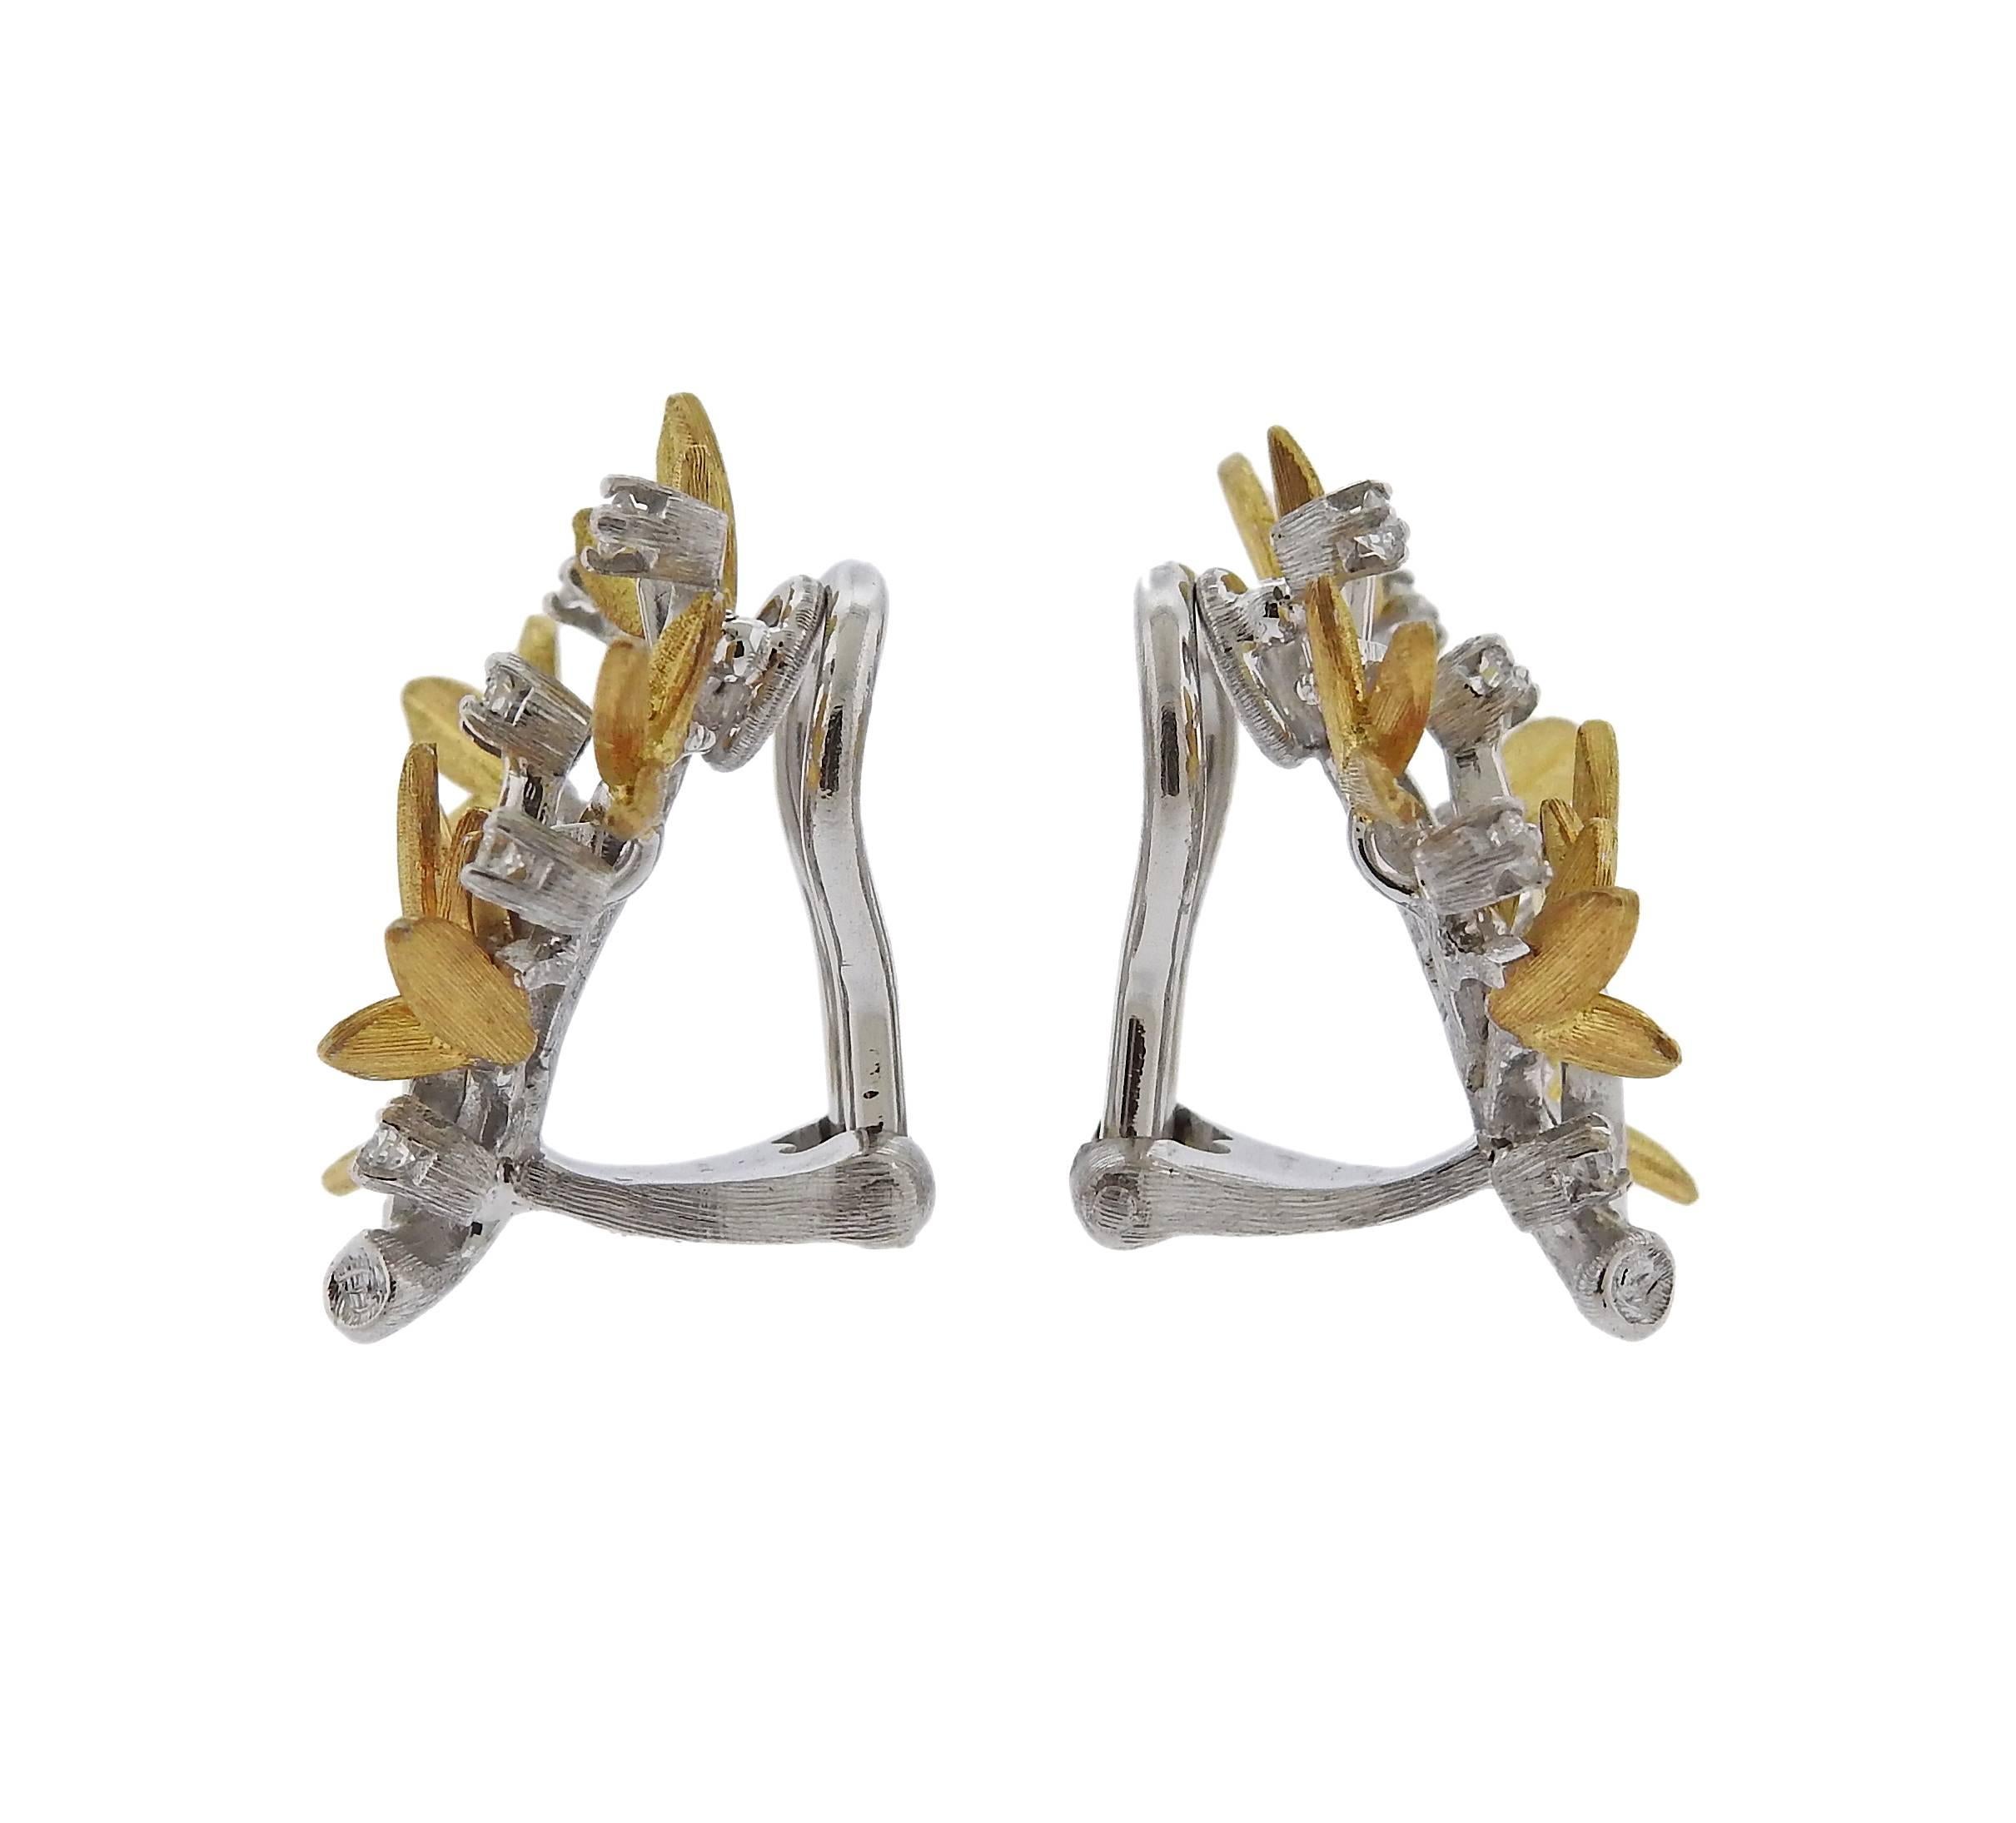 A pair of 18k gold diamond leaf motif earrings crafted by Buccellati. Earrings feature approximately 0.20ctw of H/VS diamonds. Earrings measure 24mm x 19mm. Marked Buccellati, Italy, 18k, H5527. Weight is 8.7 grams. Retail for $8,300 come with paper